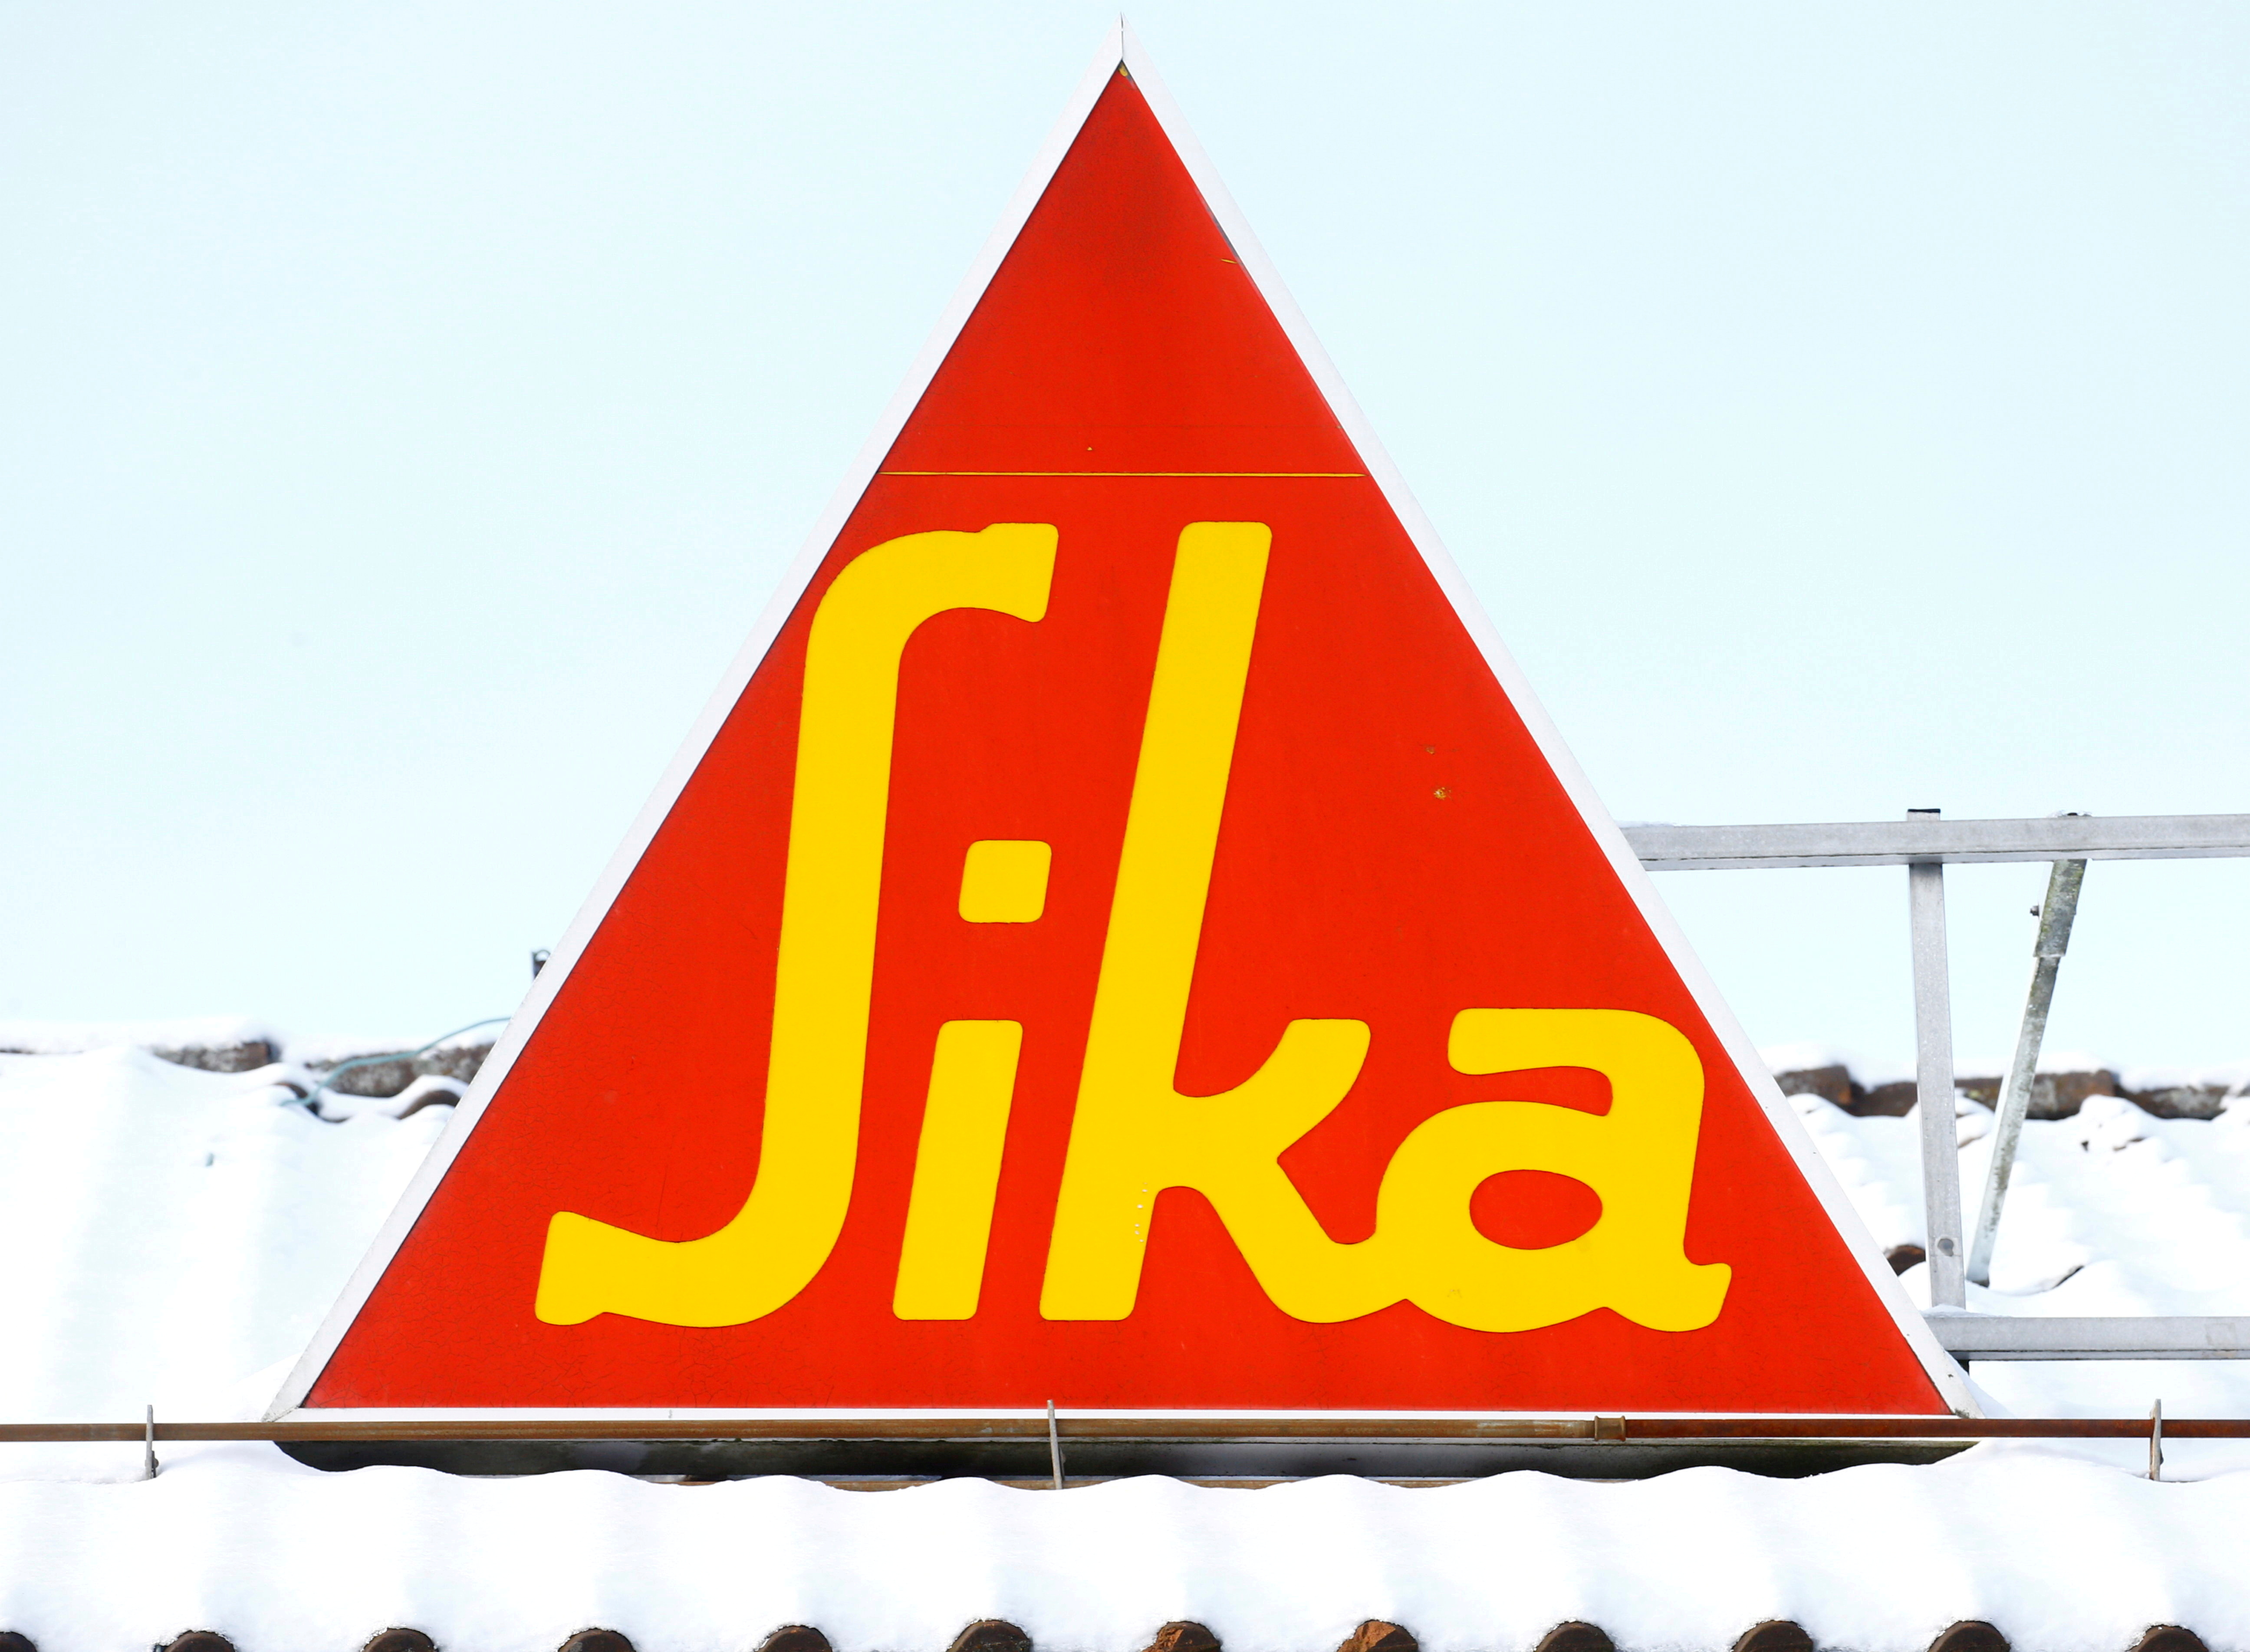 Compare prices for Silka across all European  stores